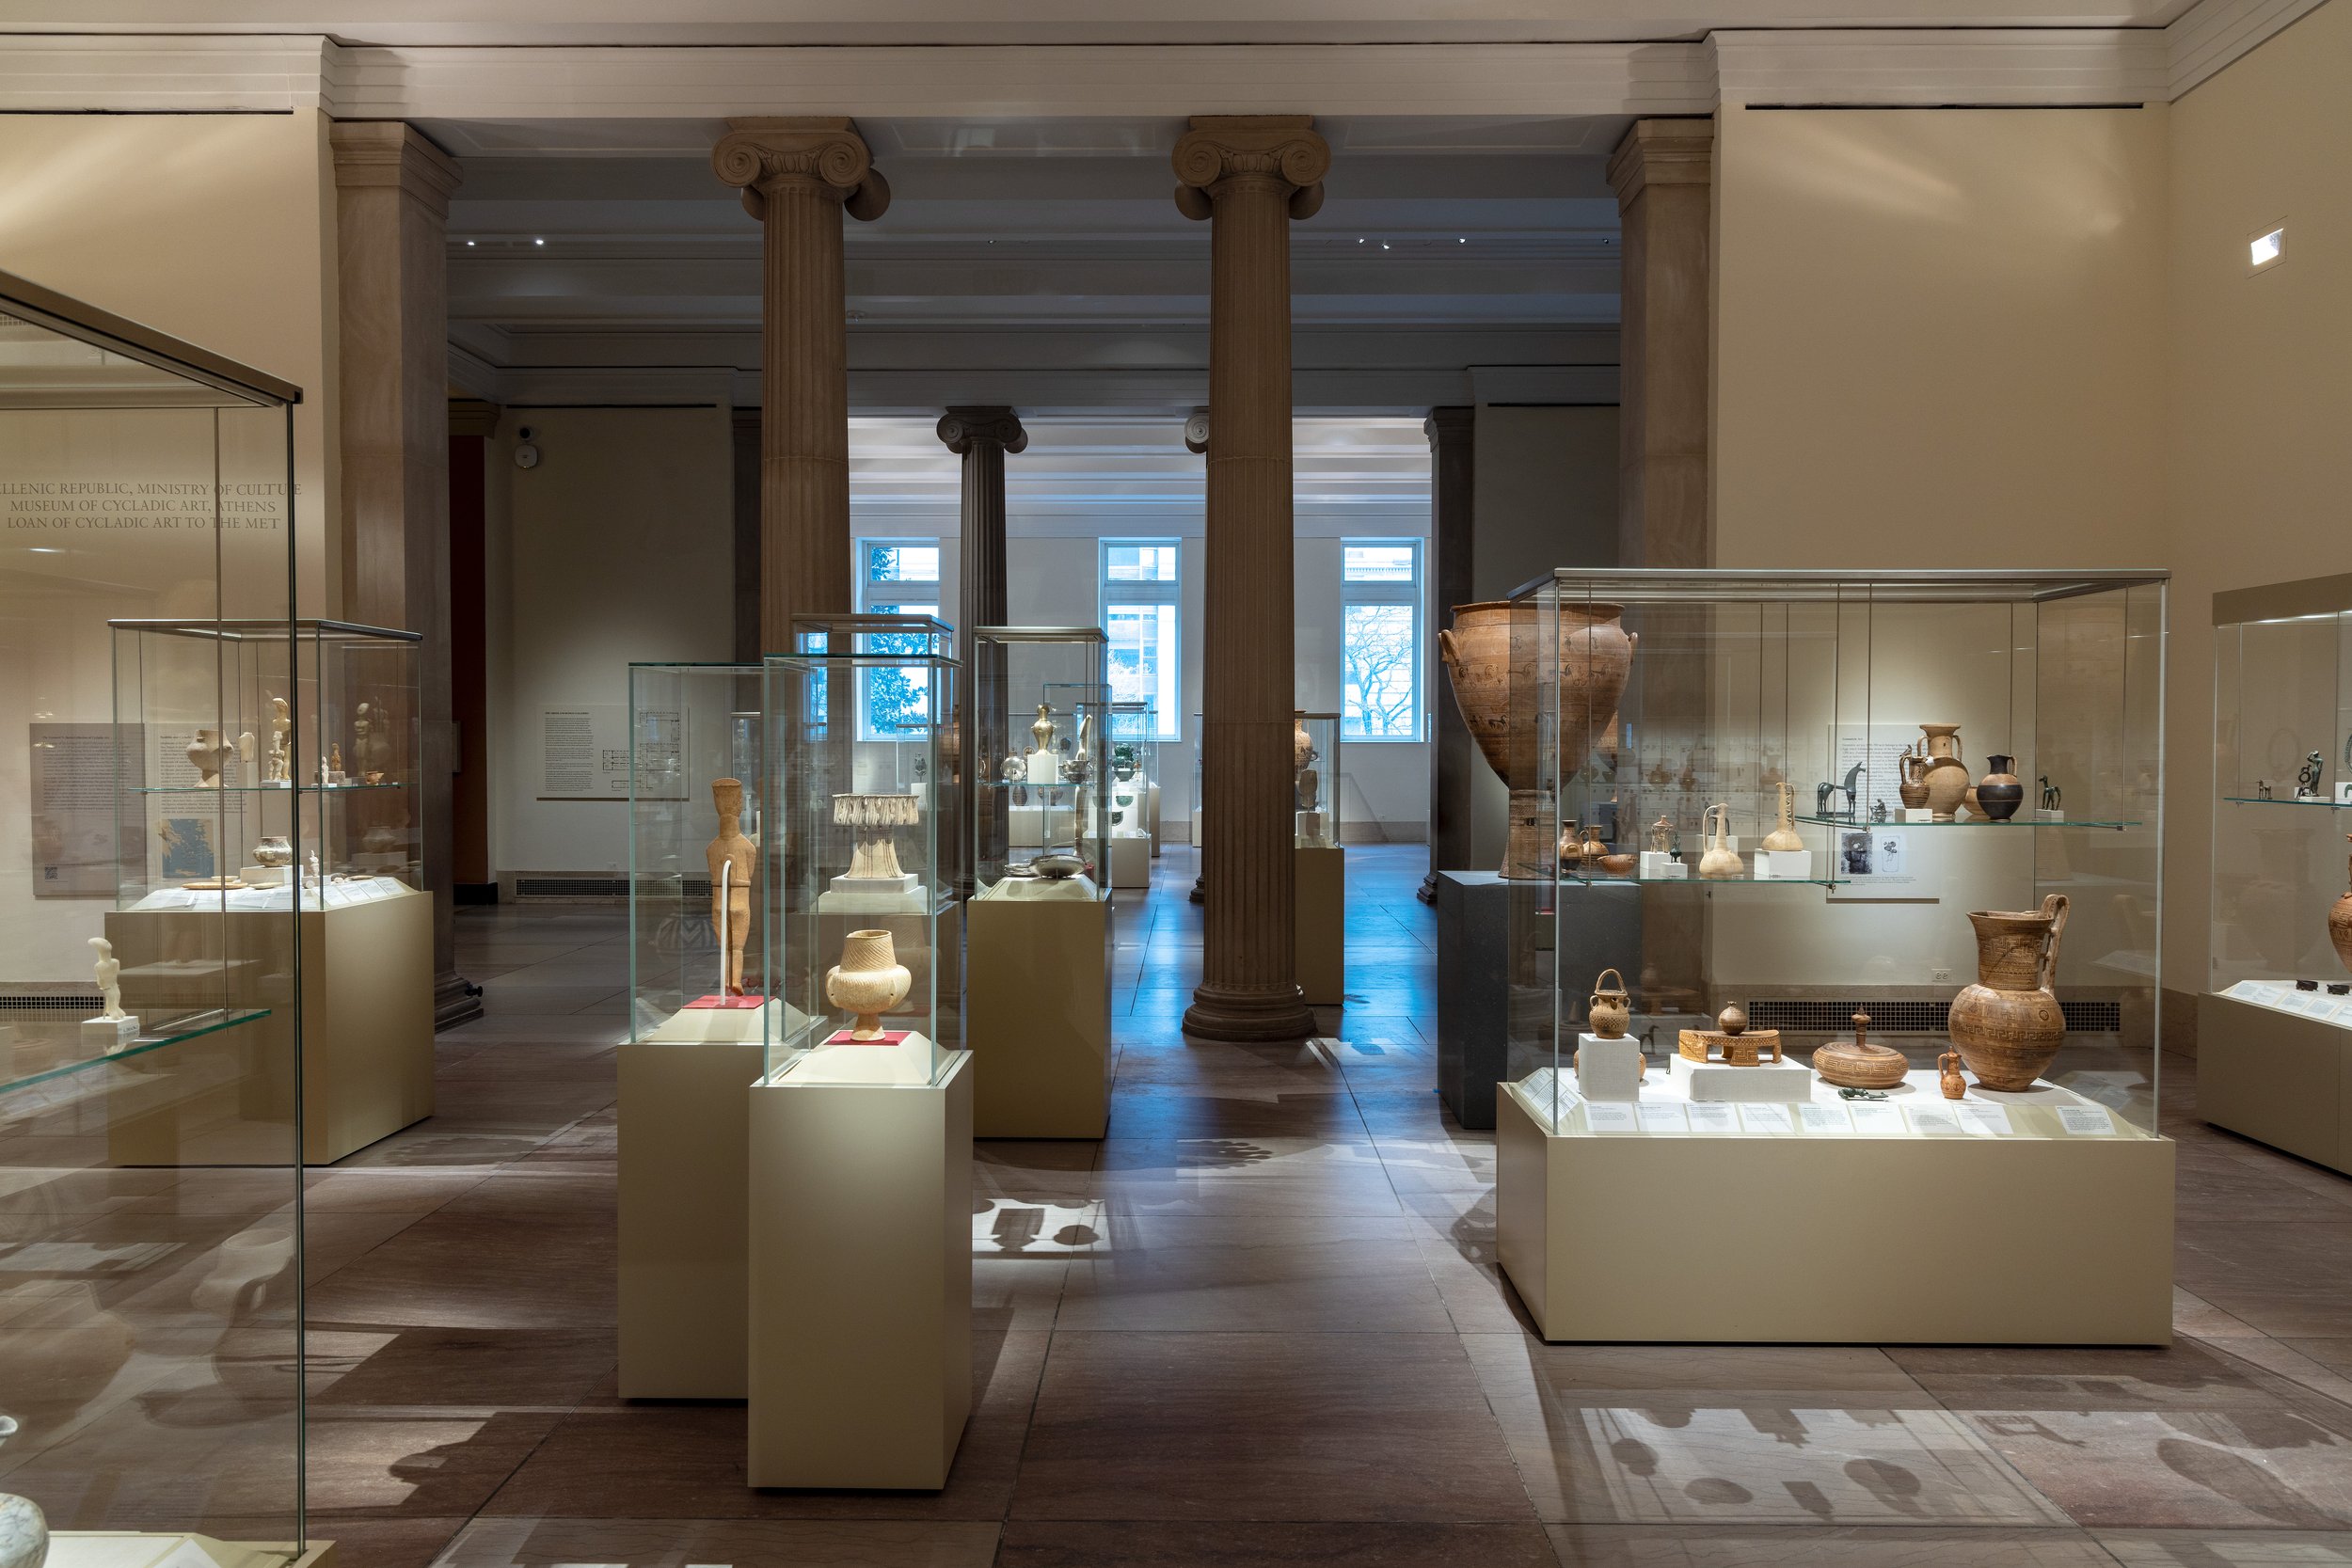   Cycladic Art: The Leonard N. Stern Collection on Loan from the Hellenic Republic  at The Metropolitan Museum of Art, on view January 25, 2024 – ongoing. Image: © The Metropolitan Museum of Art, photo by Bruce Schwarz 